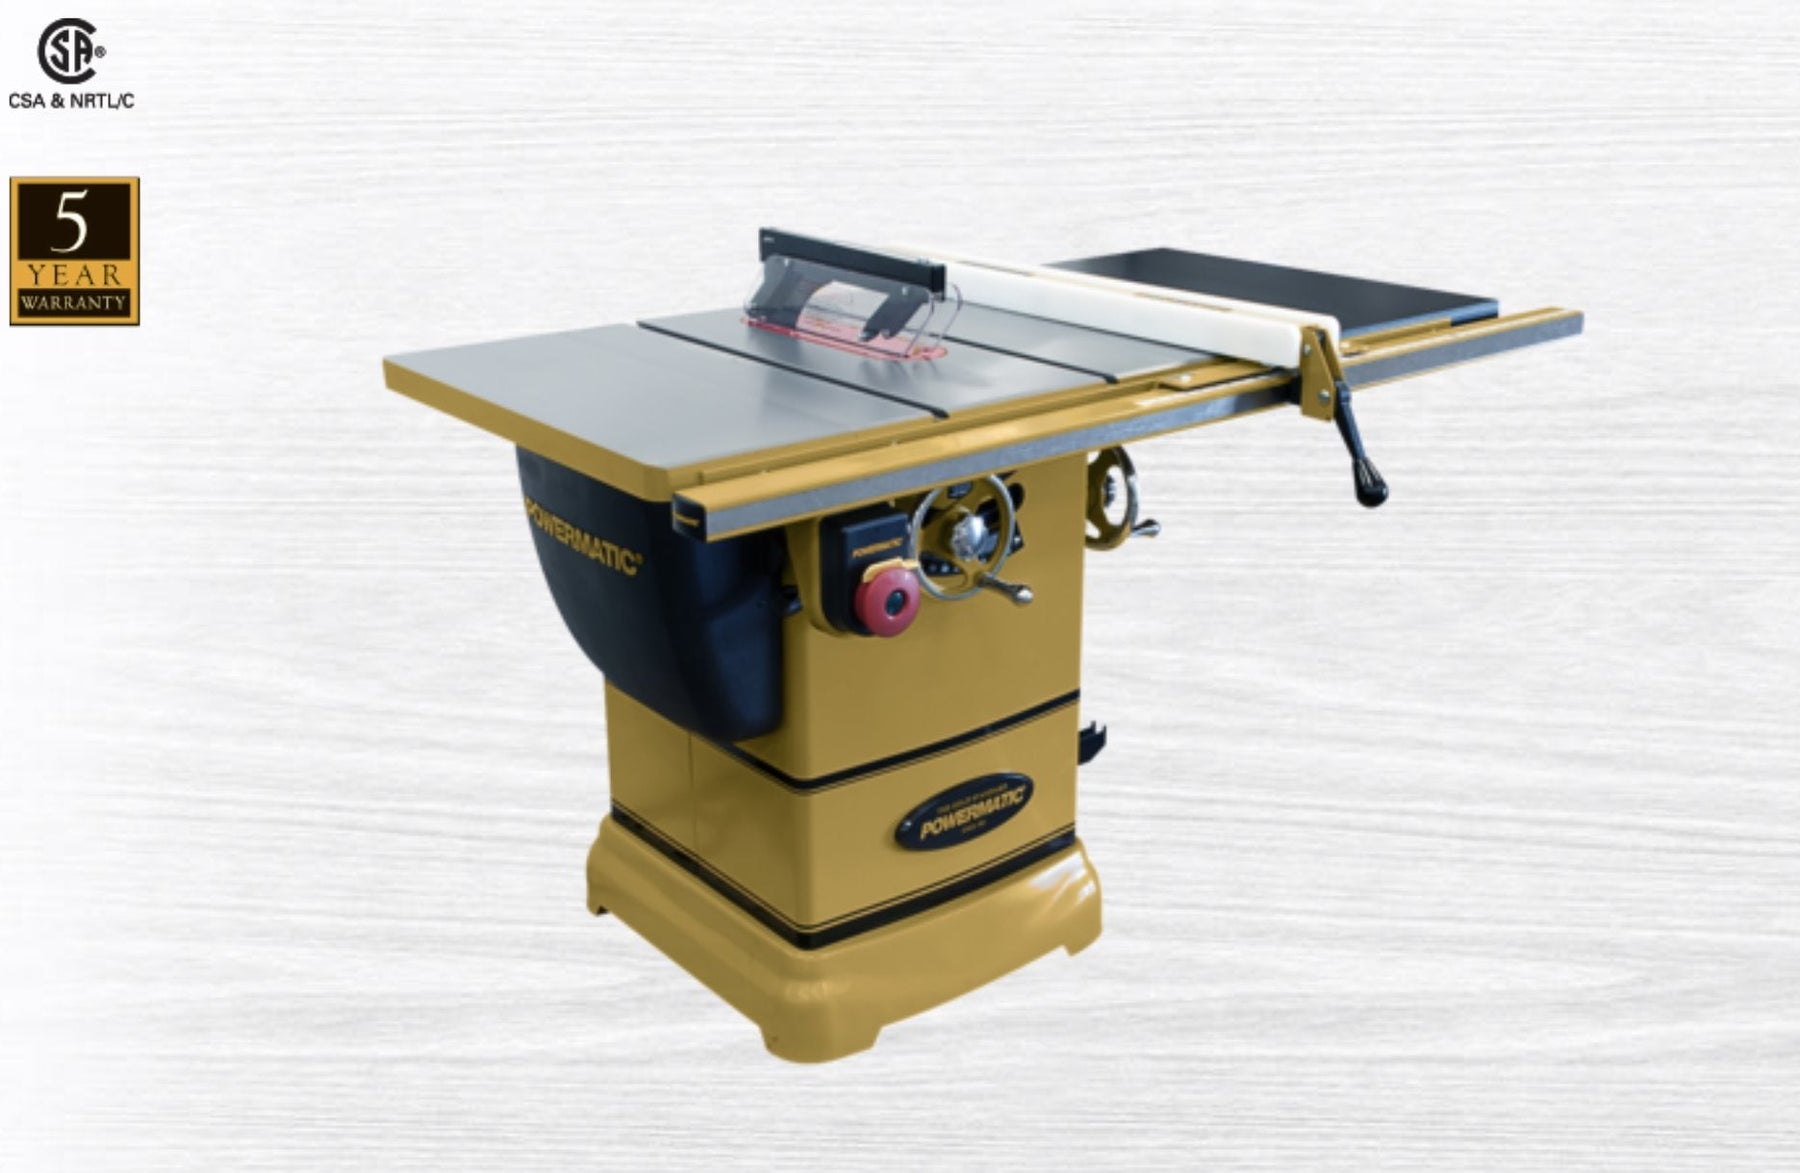 Tablesaw 30", 1-3/4HP 1PH 115V, Accu-Fence System with Riving Knife PM1000 | 1791000K |  | Table Saw | Powermatic